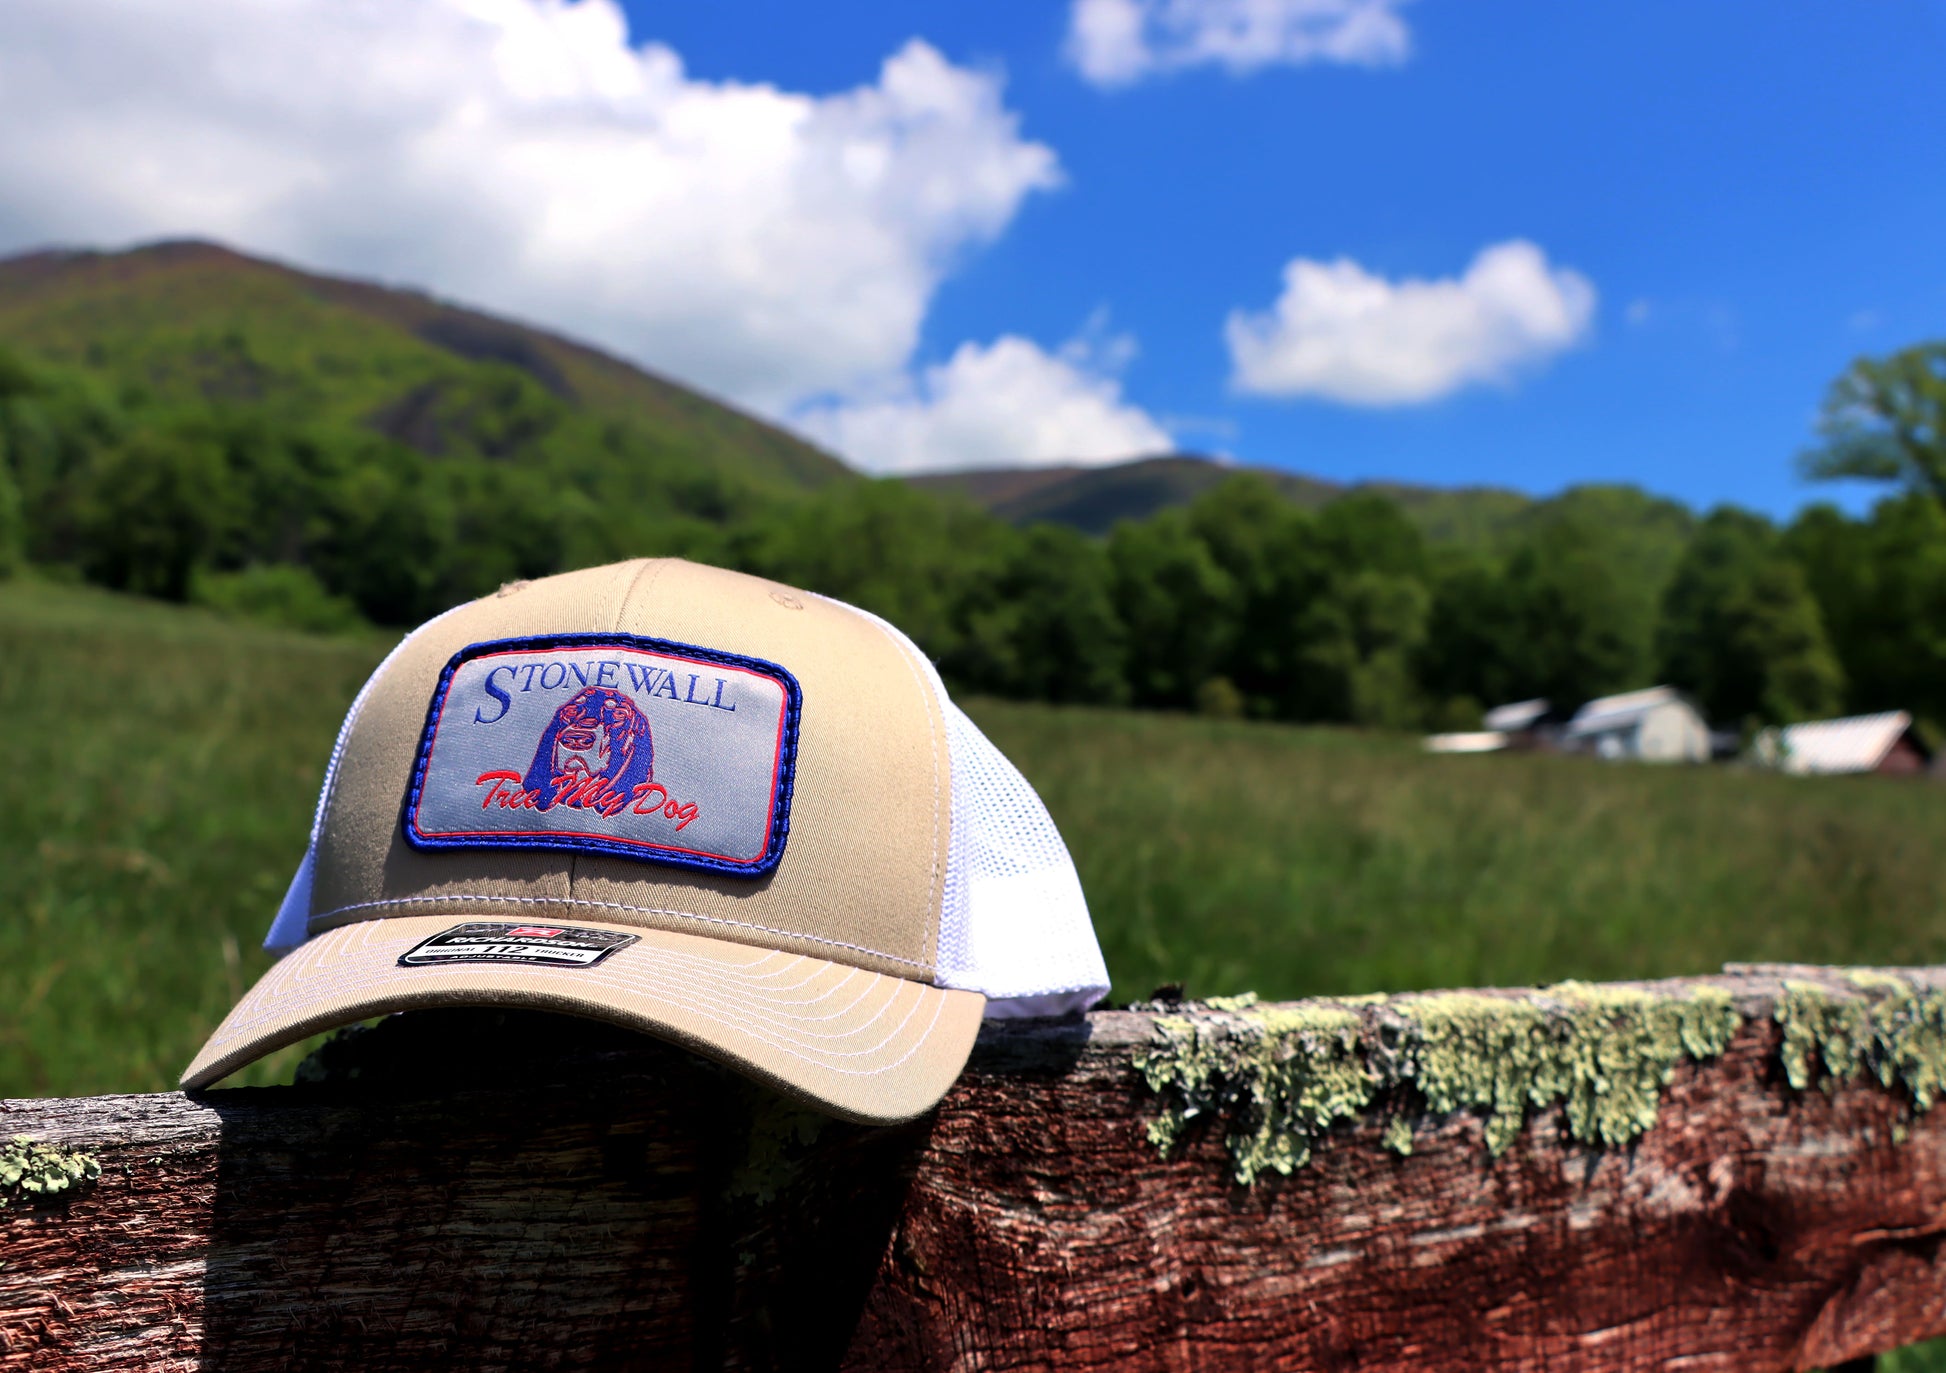 Khaki and white trucker hat with Stonewall logo patch